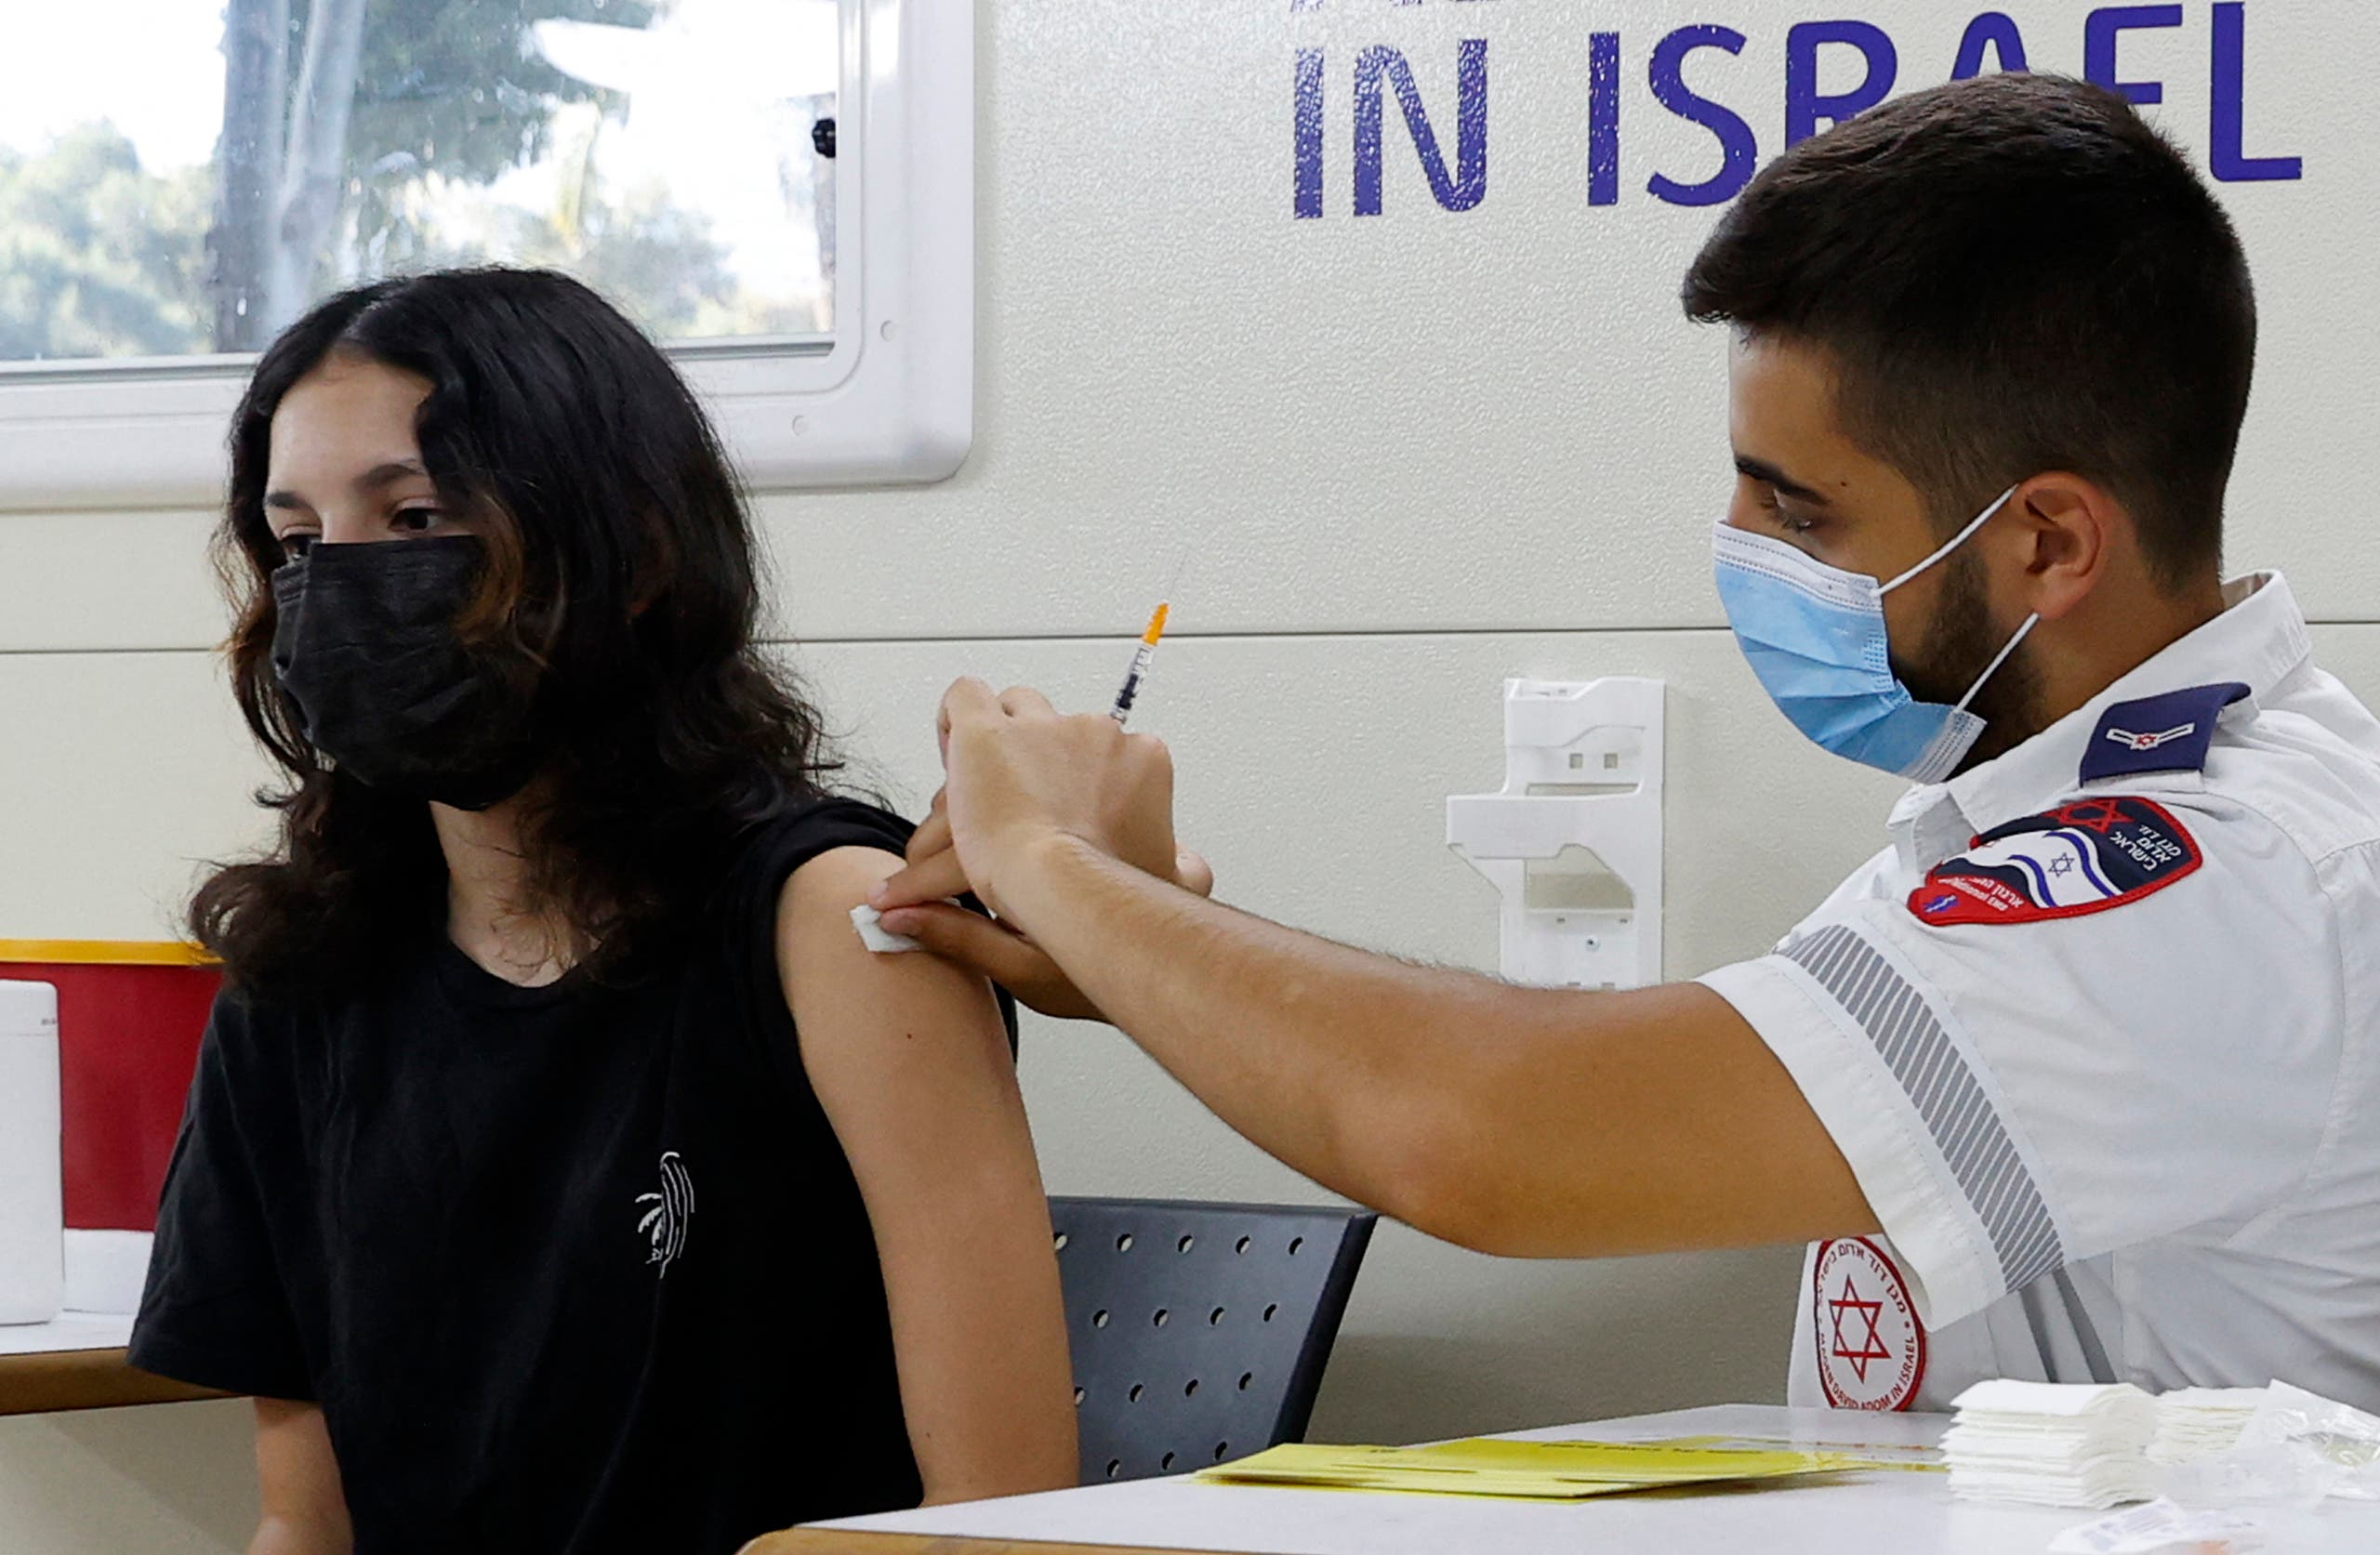 An Israeli girl receives a dose of the Pfizer/BioNTech COVID-19 vaccine from the Magen David Adom during a campaign by the Tel Aviv-Yafo Municipality to encourage the vaccination of teenagers, on July 5, 2021, in Tel Aviv. (AFP)